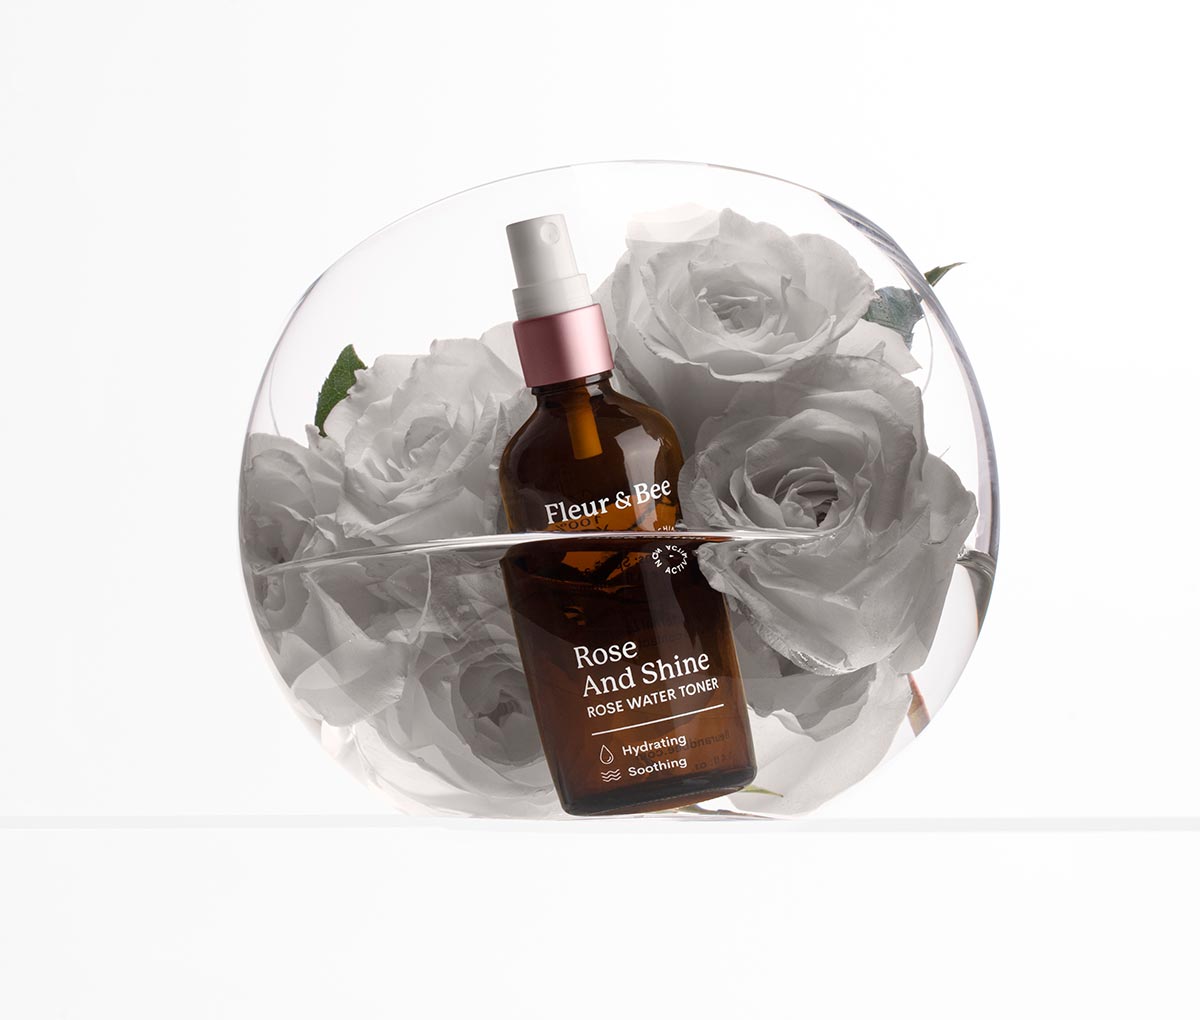 skincare product inside a bowl with roses